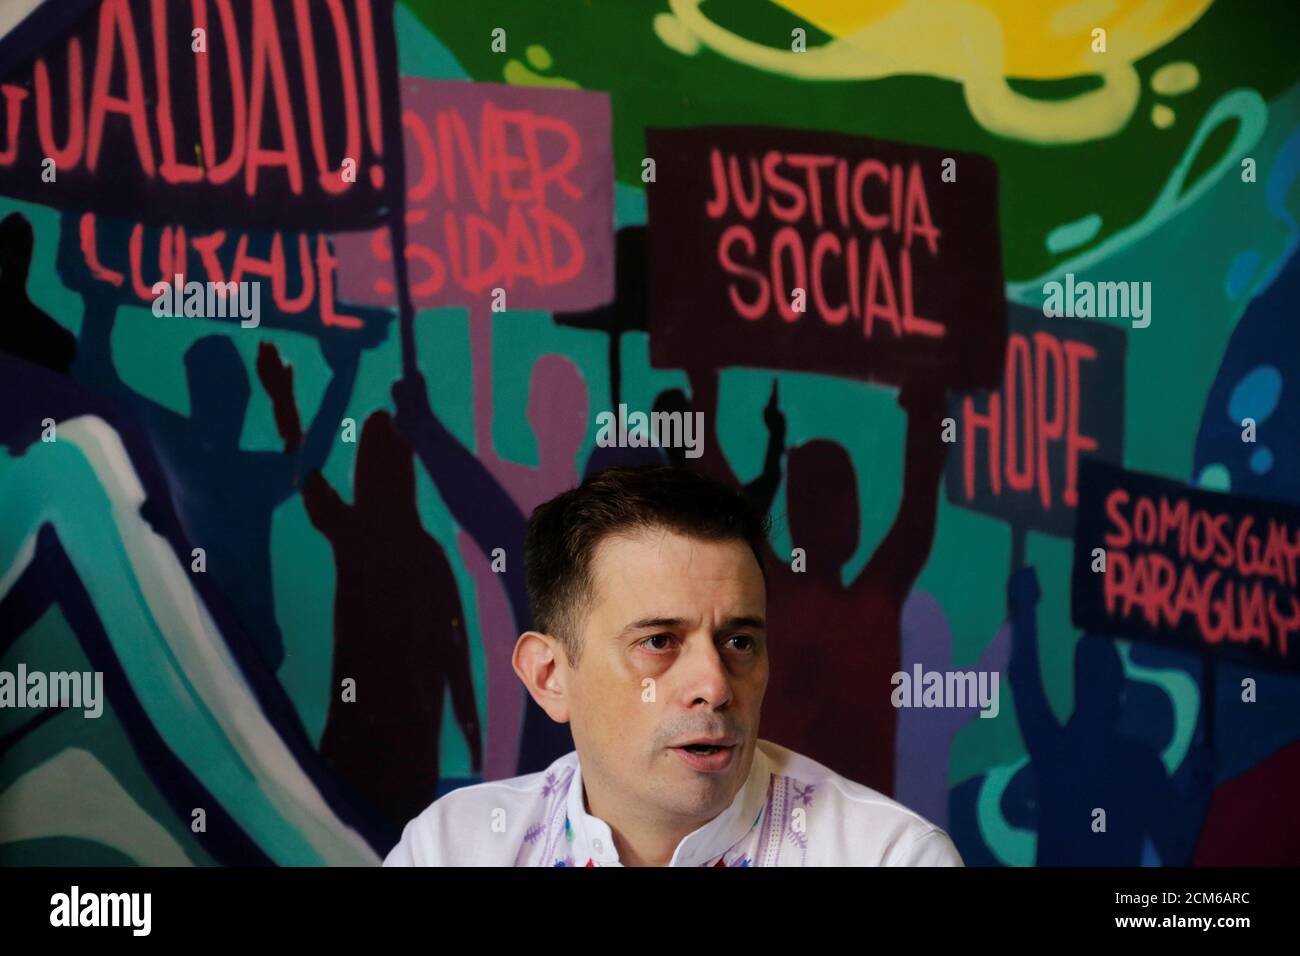 Simon Cazal, executive director of the organization SomosGay, talks to Reuters in Asuncion, Paraguay March 22, 2019. The writings on the wall read: 'Equality, Diversity, Social Justice and We are Gay Paraguay.' Picture taken March 22, 2019. REUTERS/Jorge Adorno Stock Photo